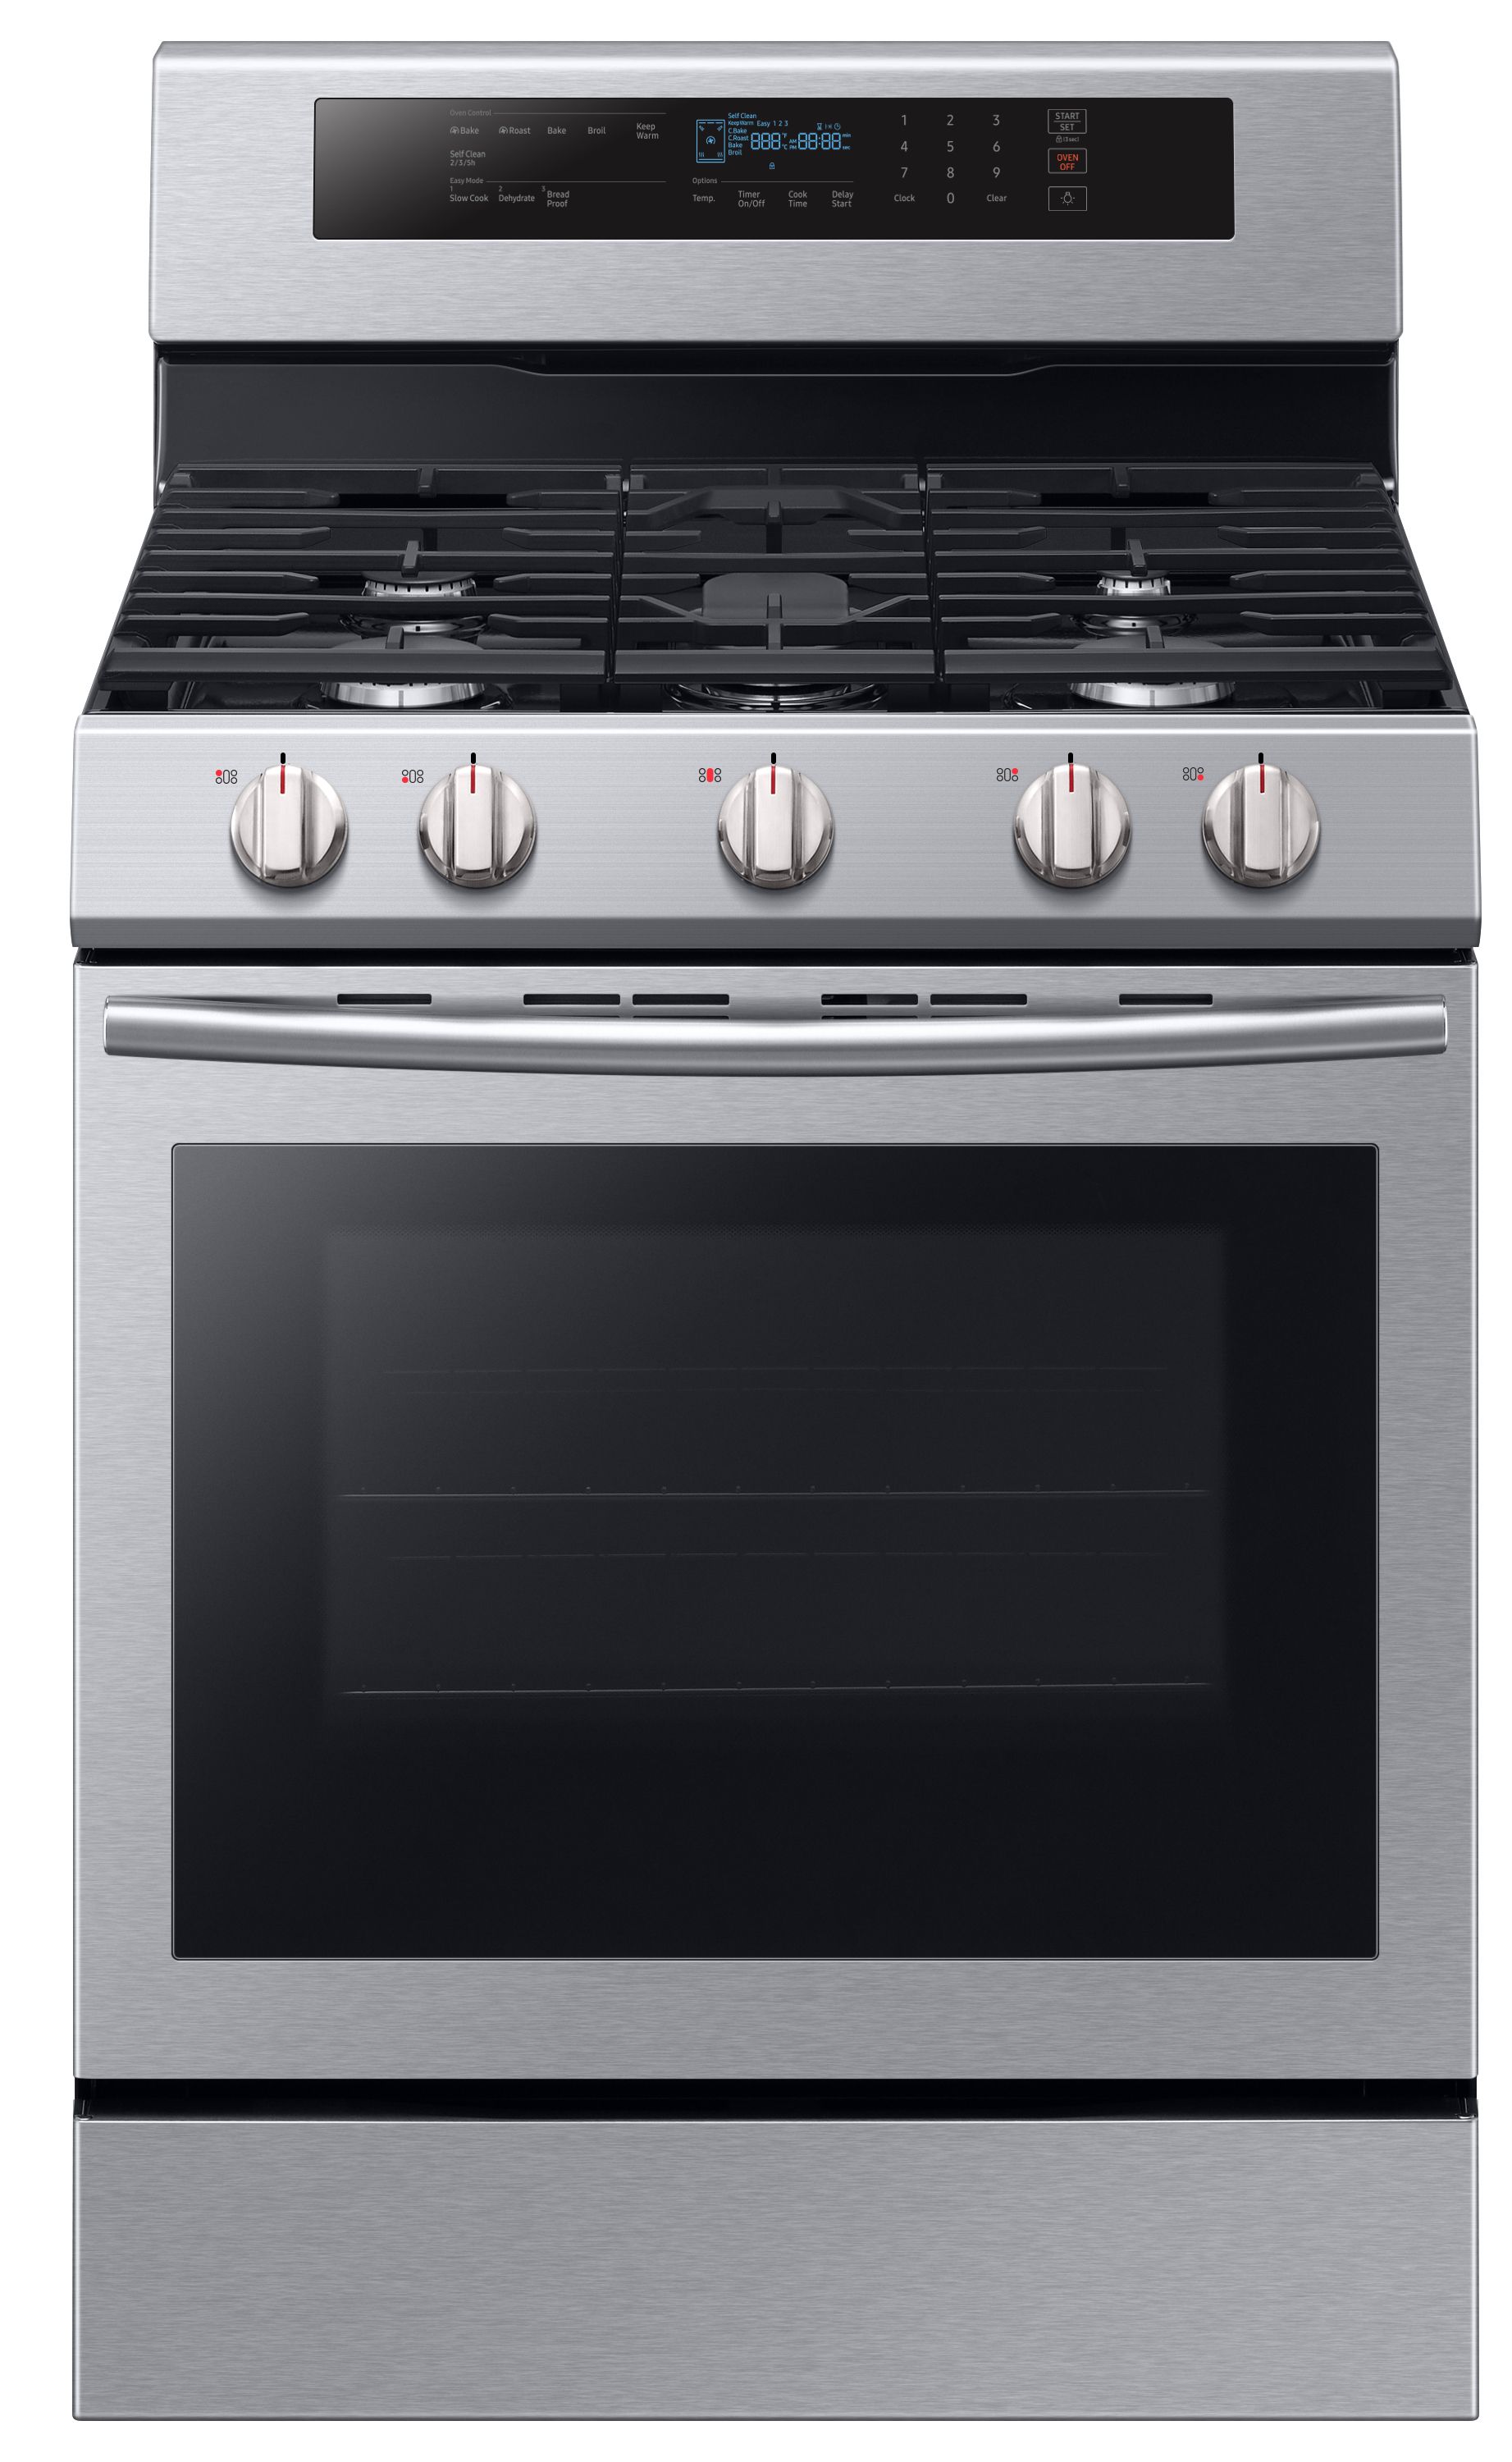 samsung-nx58m6630ss-aa-5-8-cu-ft-gas-range-w-true-convection-and